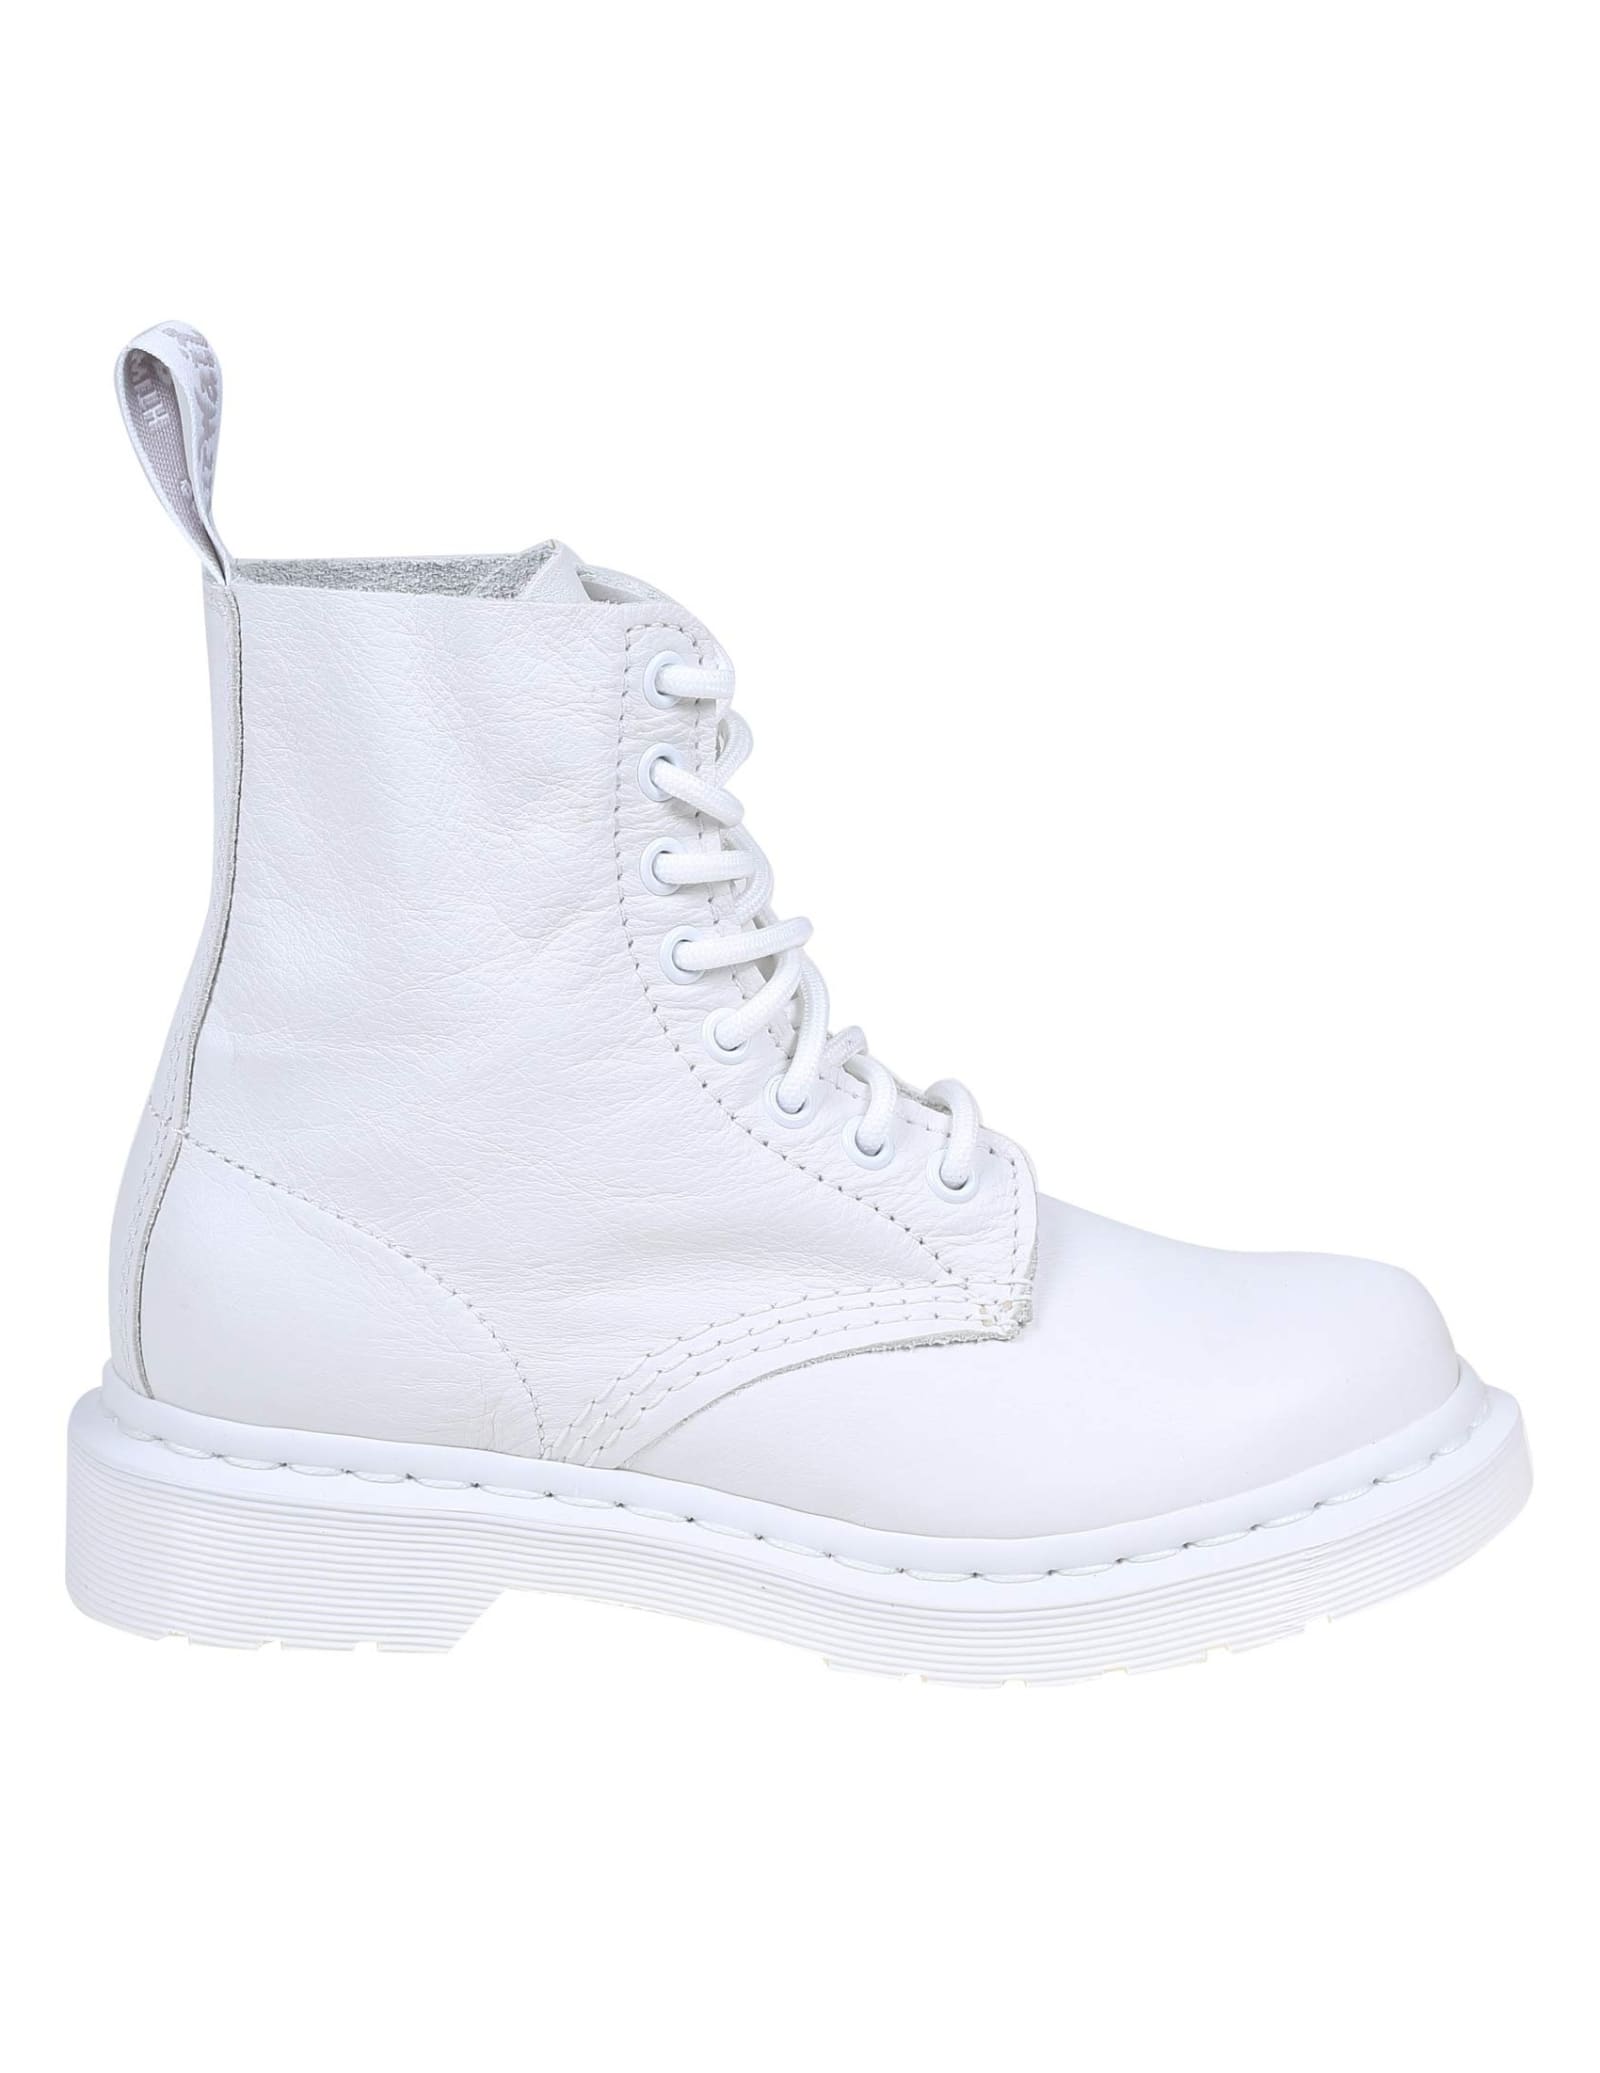 Dr. Martens Dr. martens 1460 Pascal Mono In White Leather